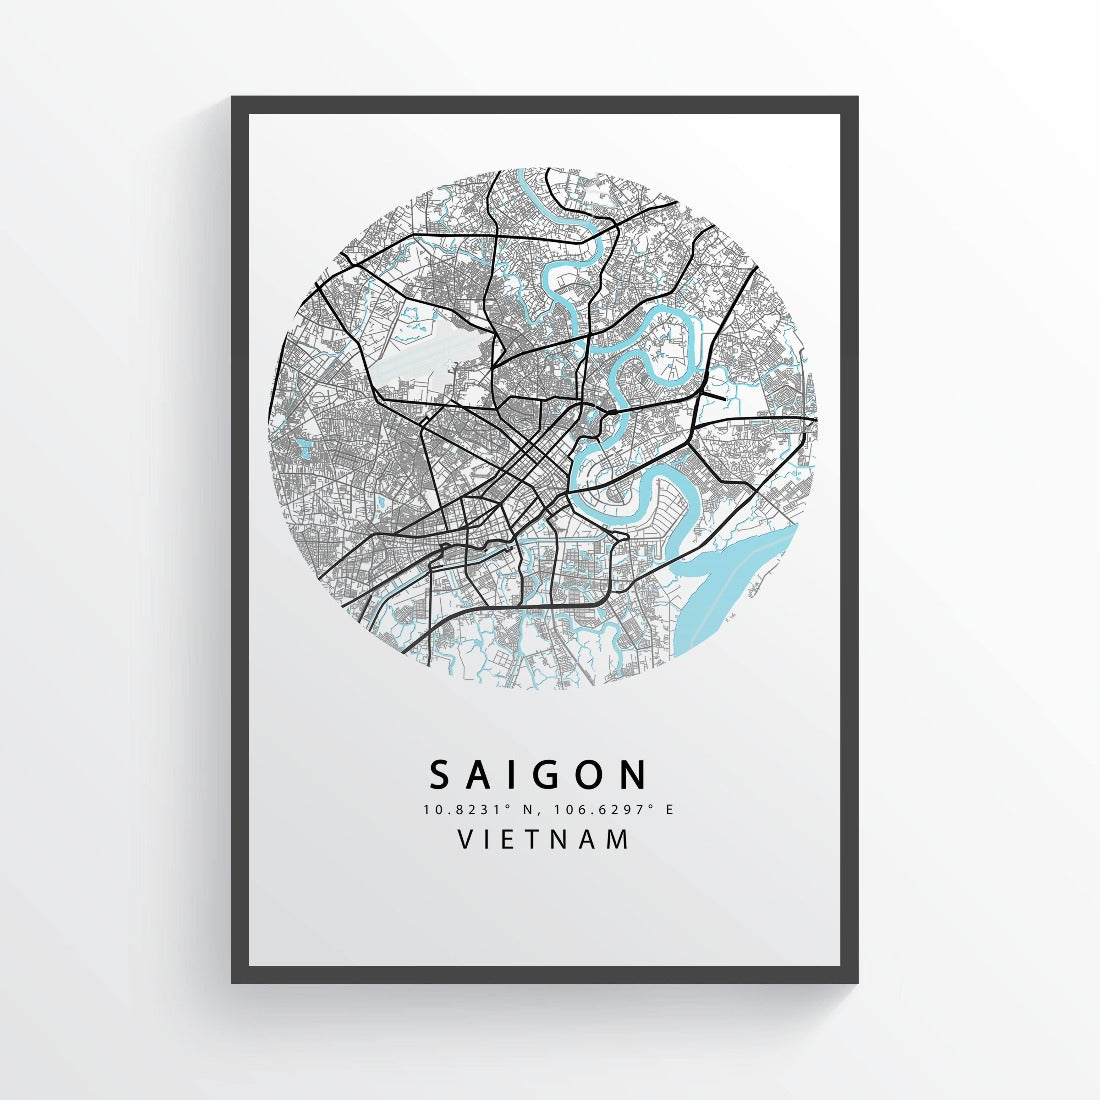 This Ho Chi Minh City Map Print is perfect for your travels to Vietnam. The map print gives you a comprehensive view of the city, from its world-famous landmarks to its hidden alleyways. With its intricate details and vibrant colors, this map print is sure to add a touch of adventure to your home decor.